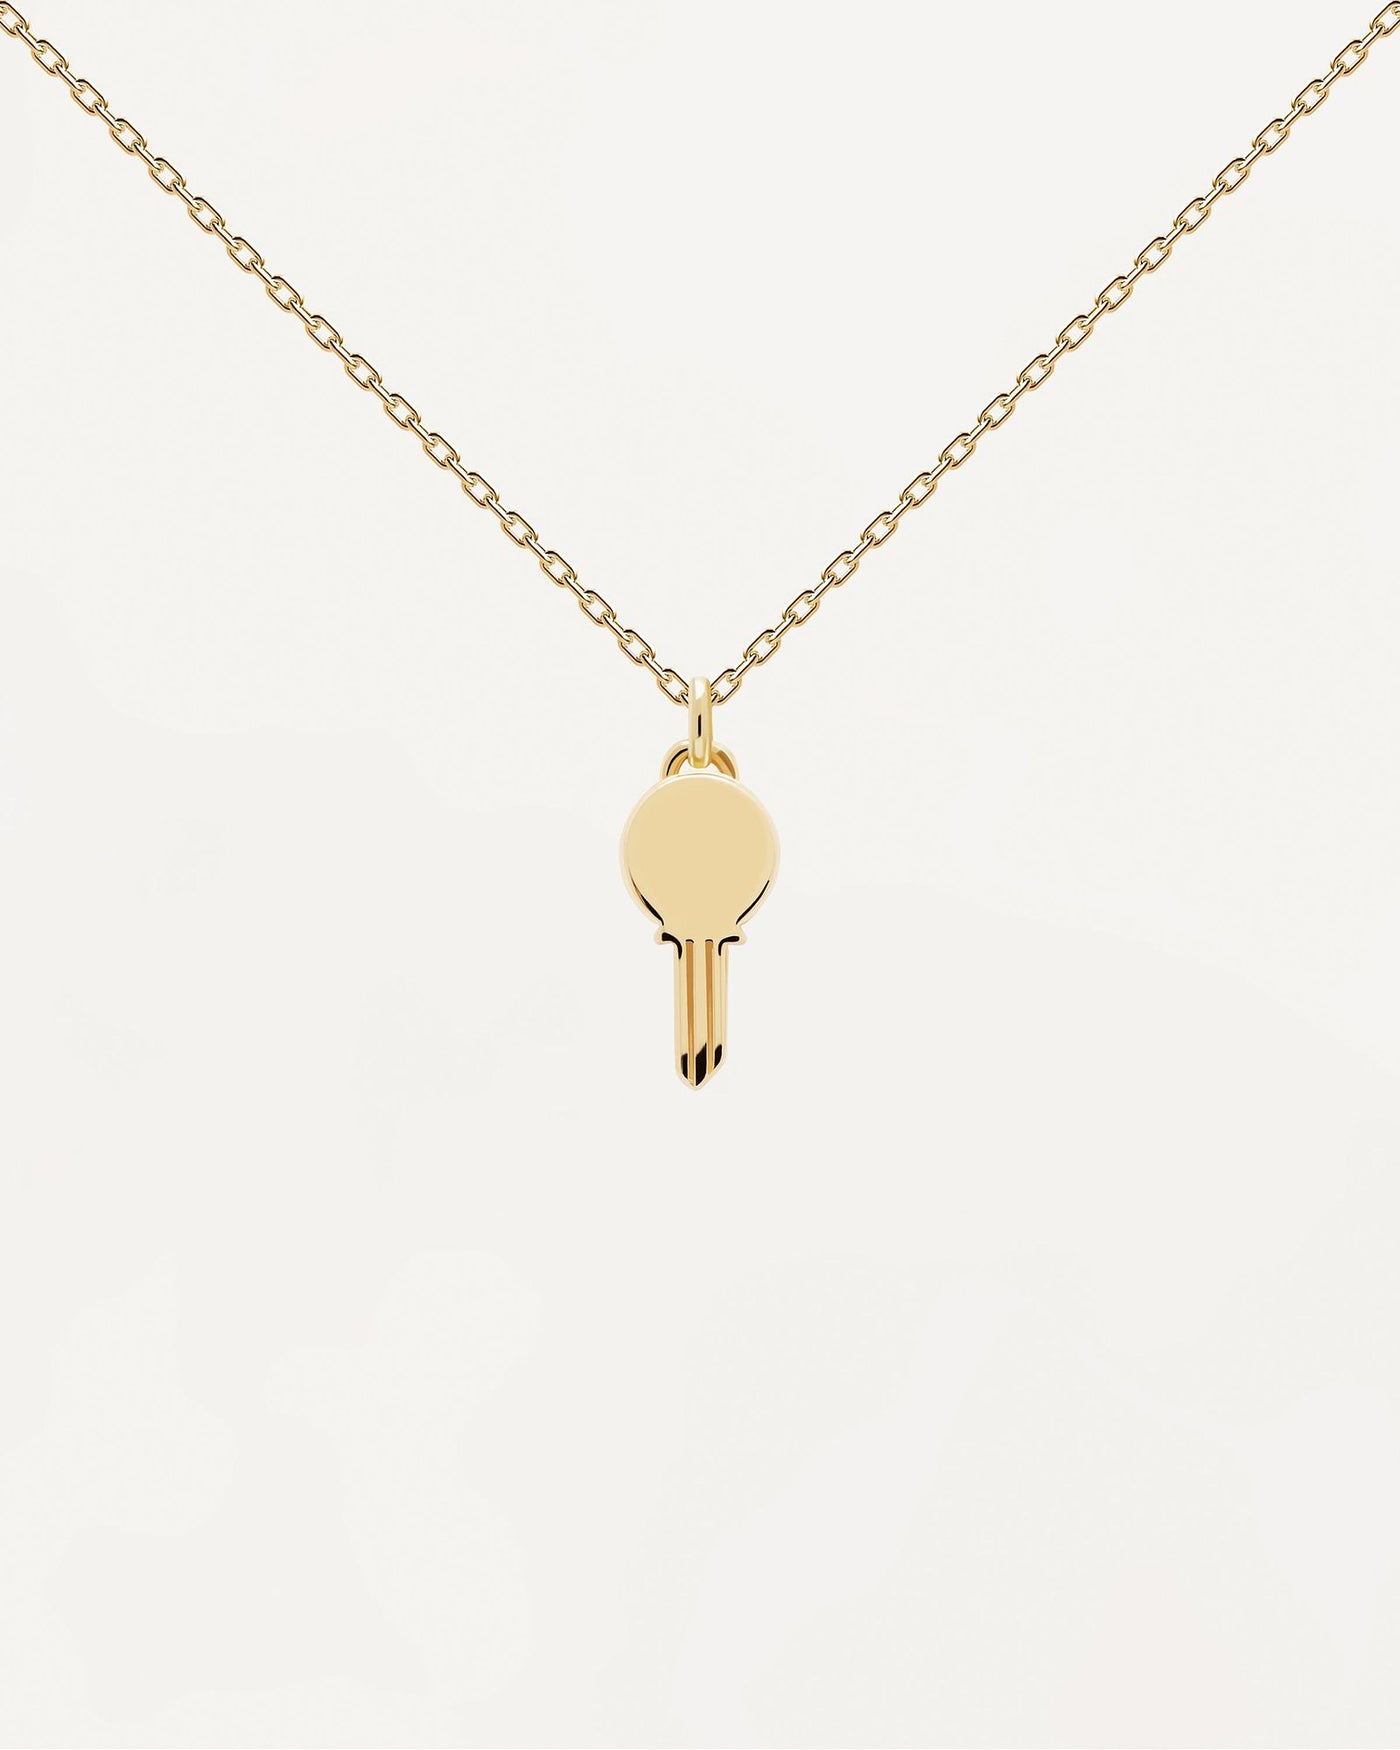 2024 Selection | Eternum Necklace. Gold-plated silver necklace with personalized key pendant to engrave. Get the latest arrival from PDPAOLA. Place your order safely and get this Best Seller. Free Shipping.